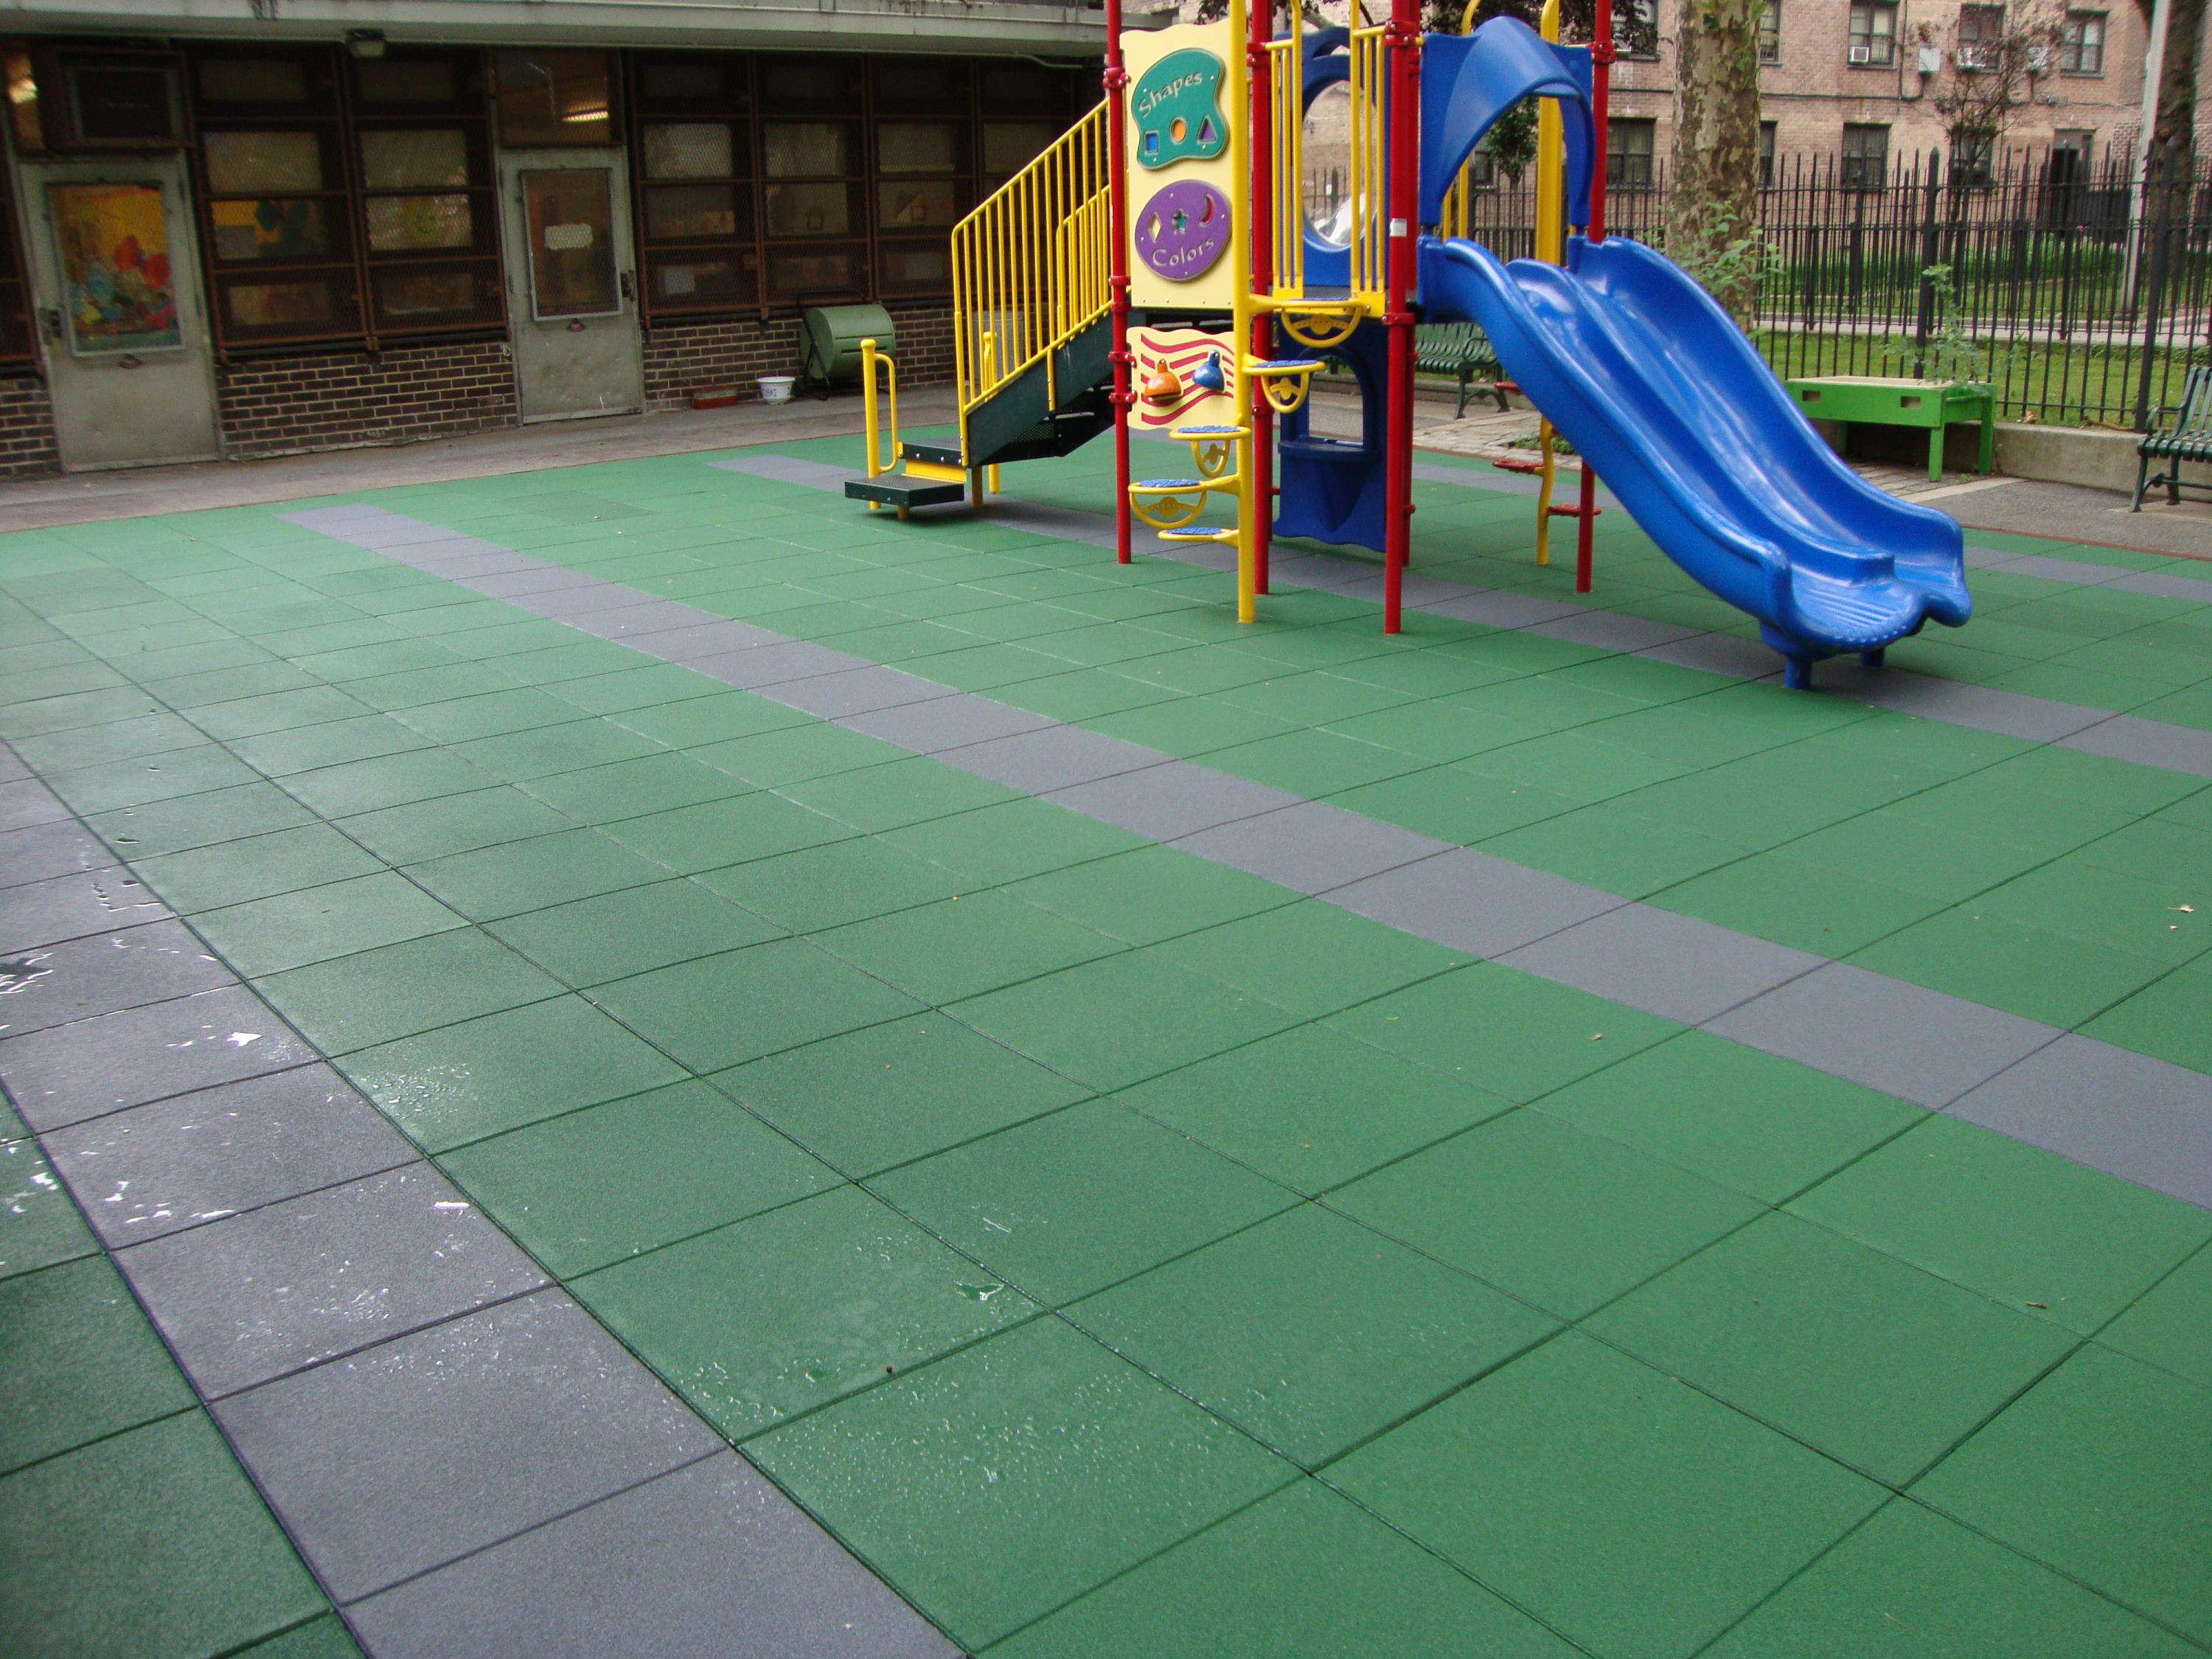 Tompkin Daycare Center Playground Area Using 2" Pave-Land Series d